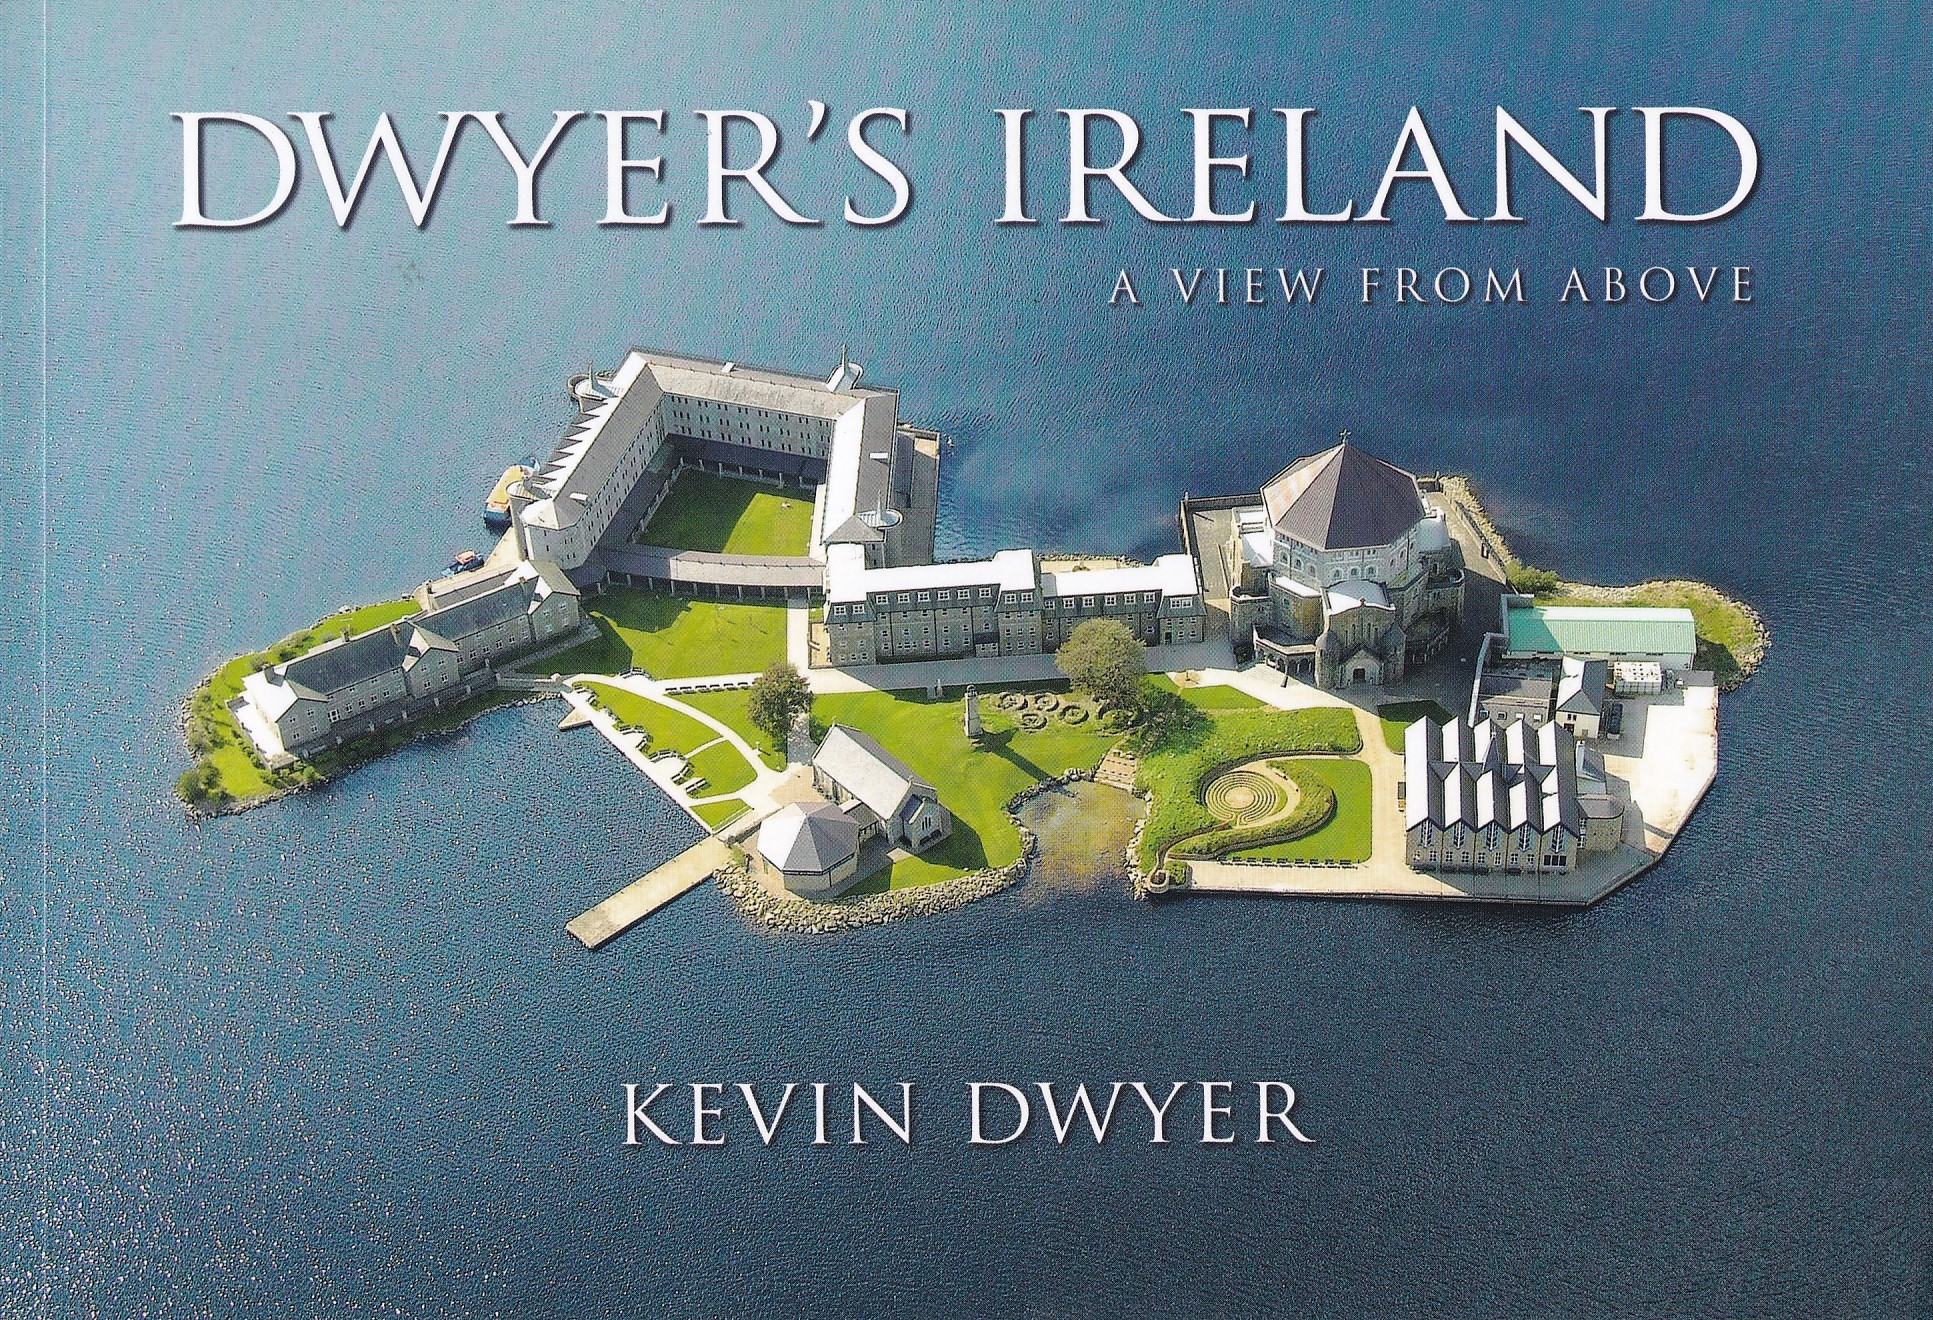 Dwyer’s Ireland: A View From Above by Kevin Dwyer